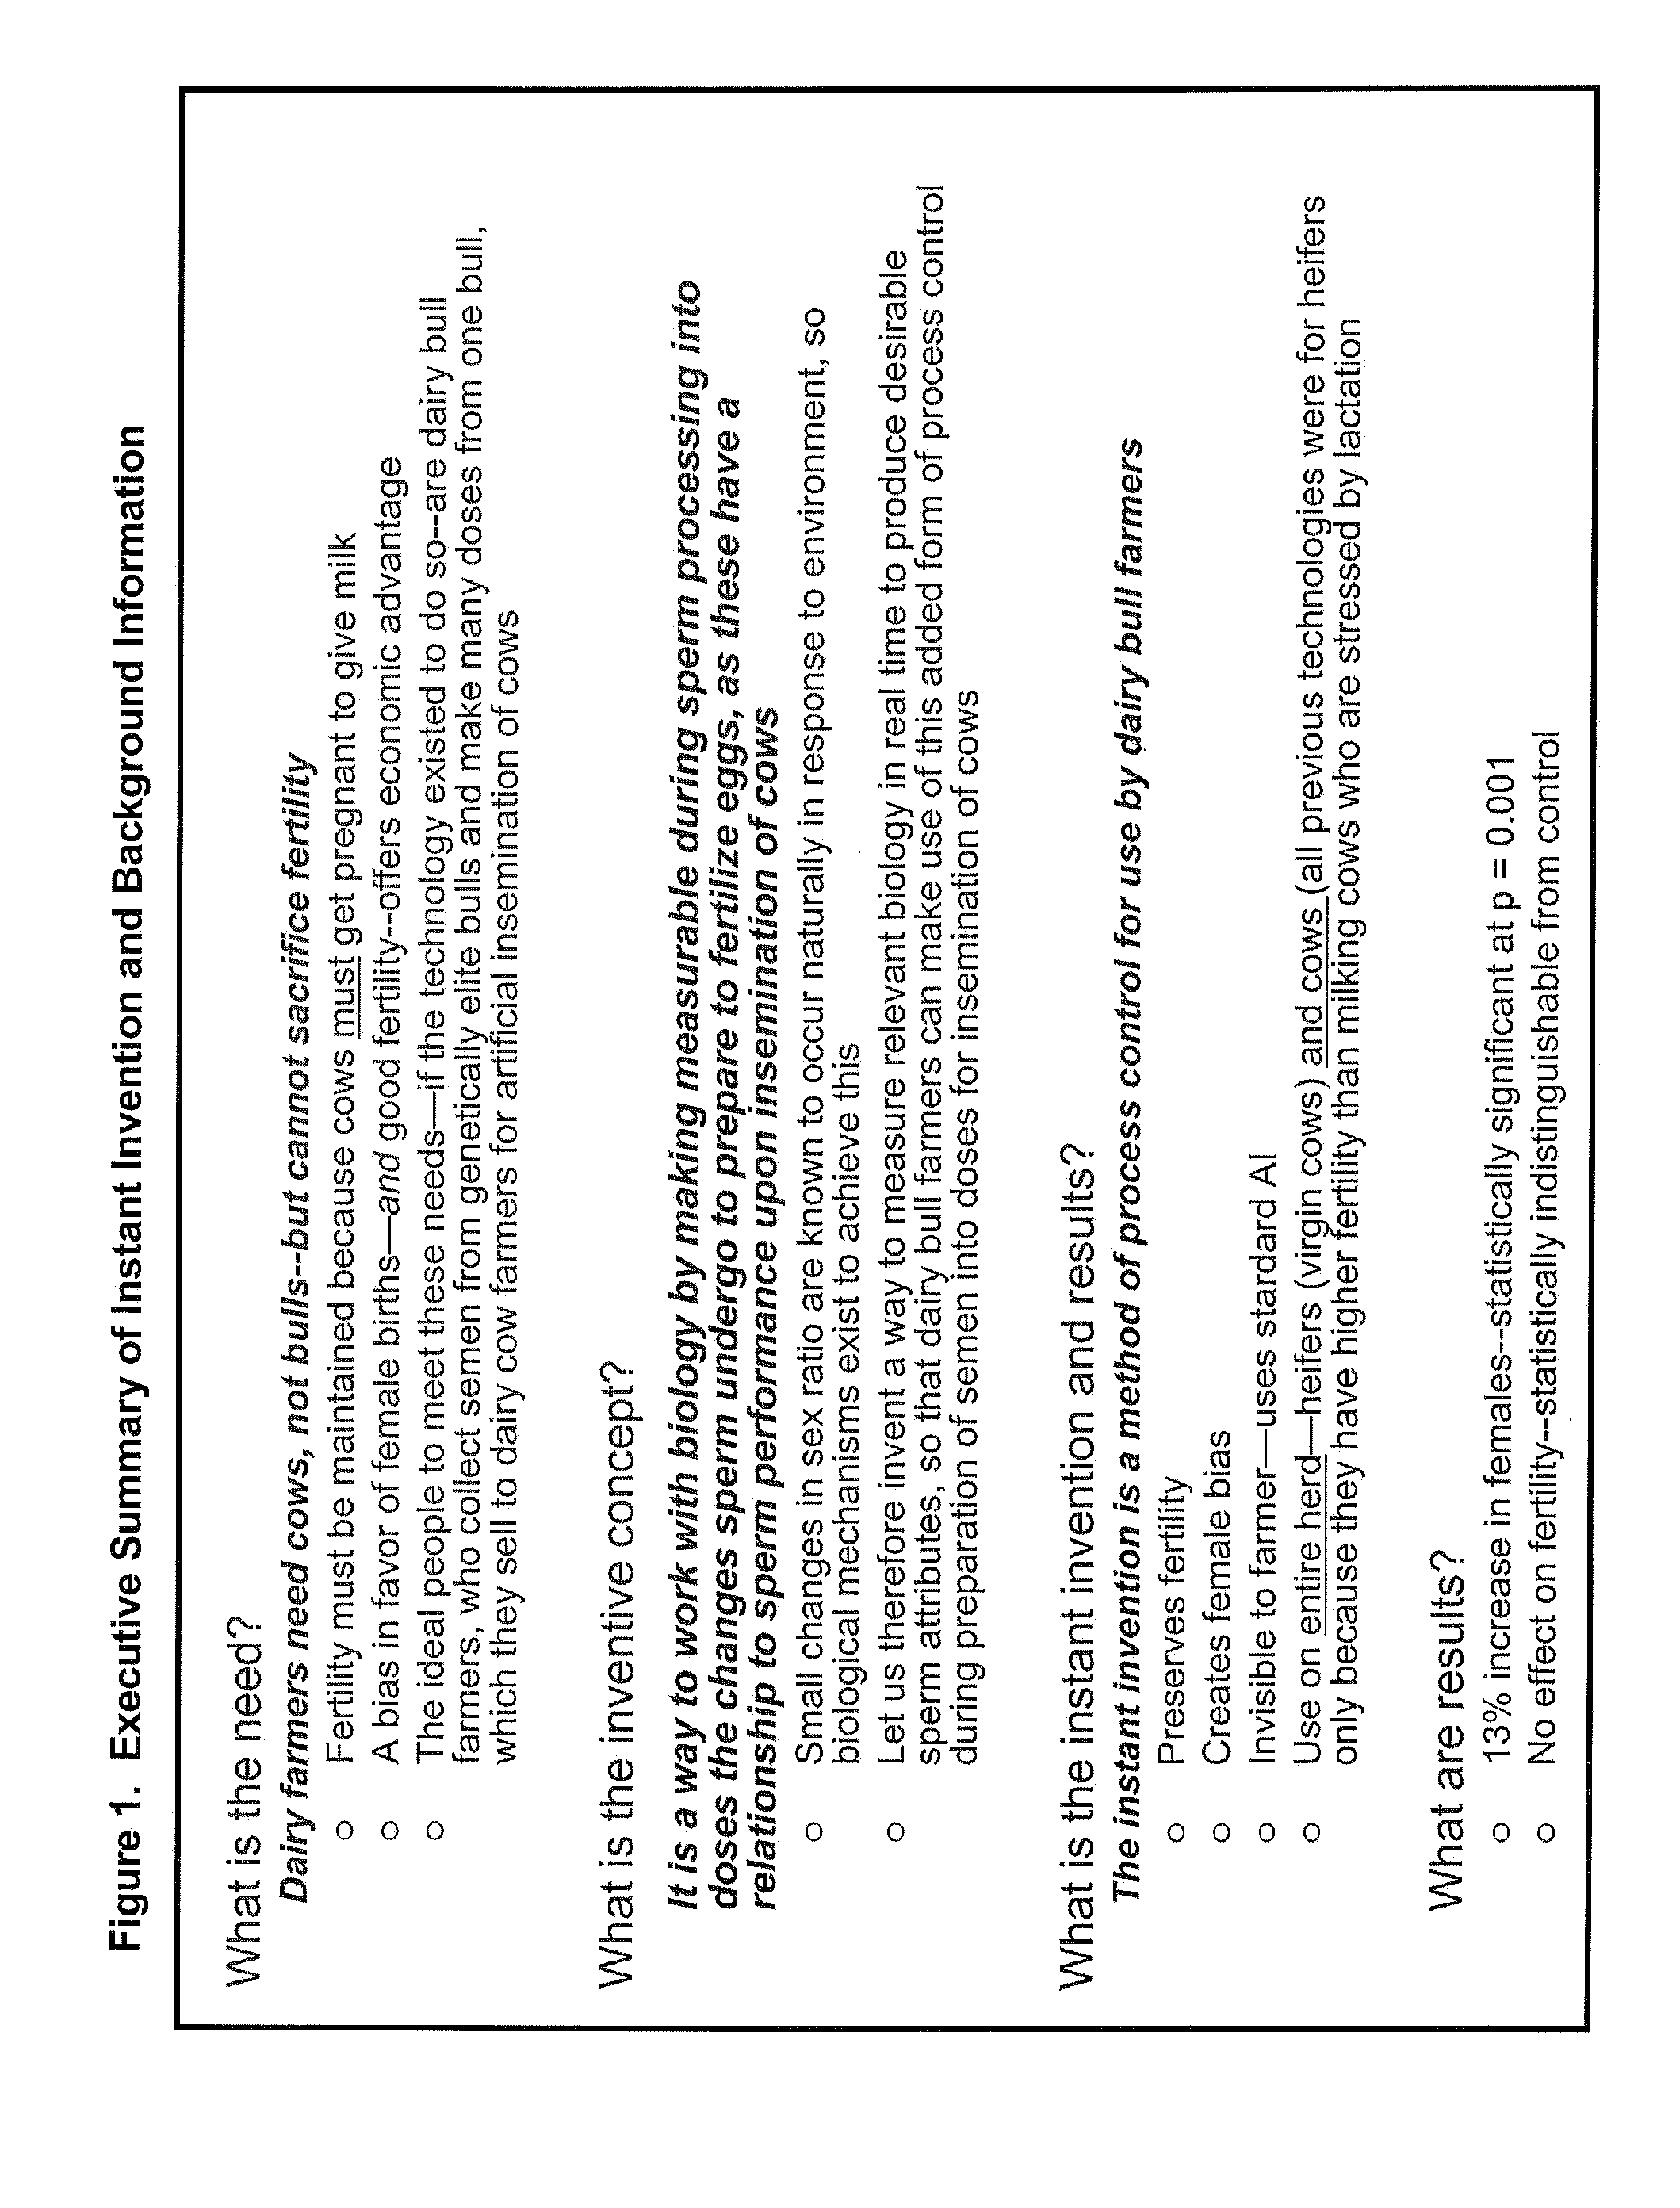 Methods for Improving Fertility and Selectivity For Desired Offspring Sex in Artificial Insemination